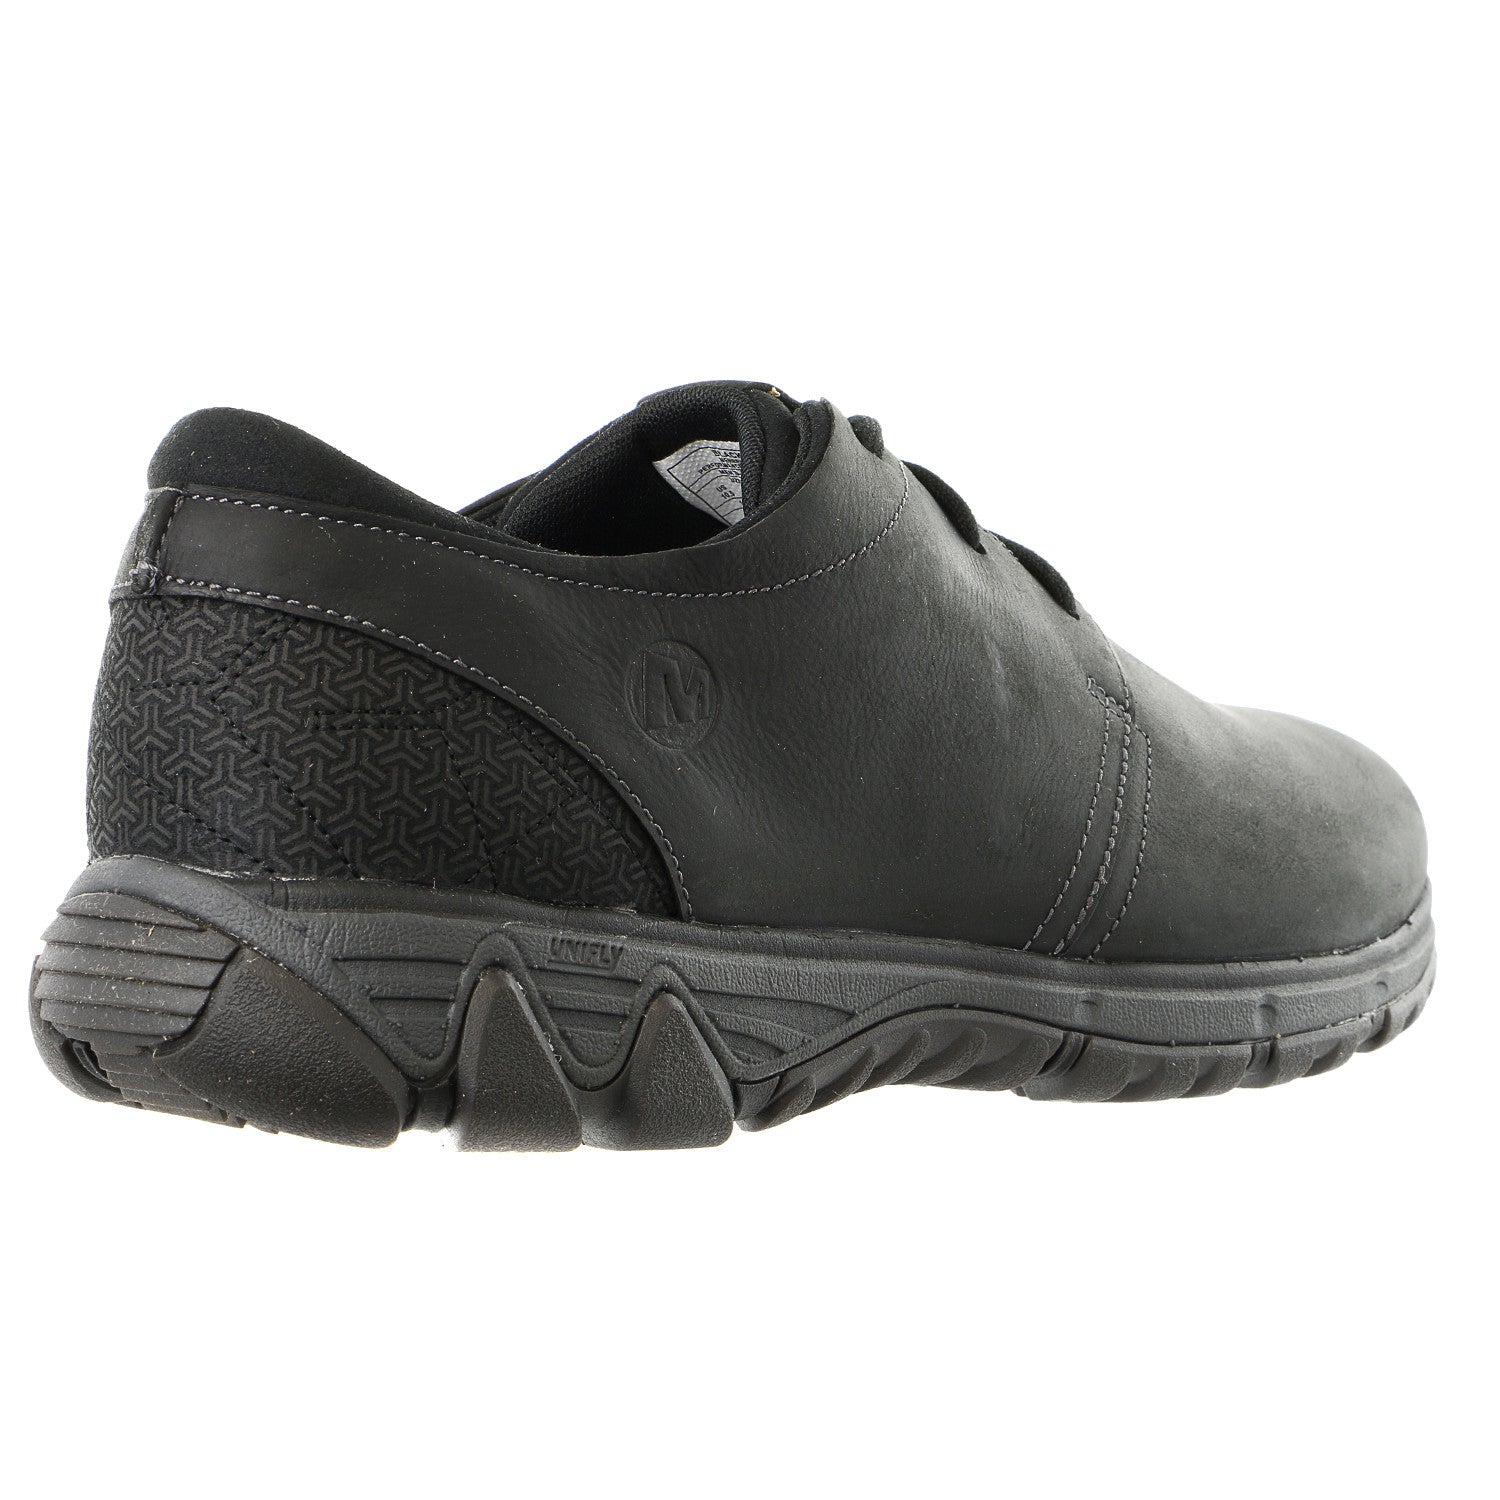 merrell slip on leather shoes